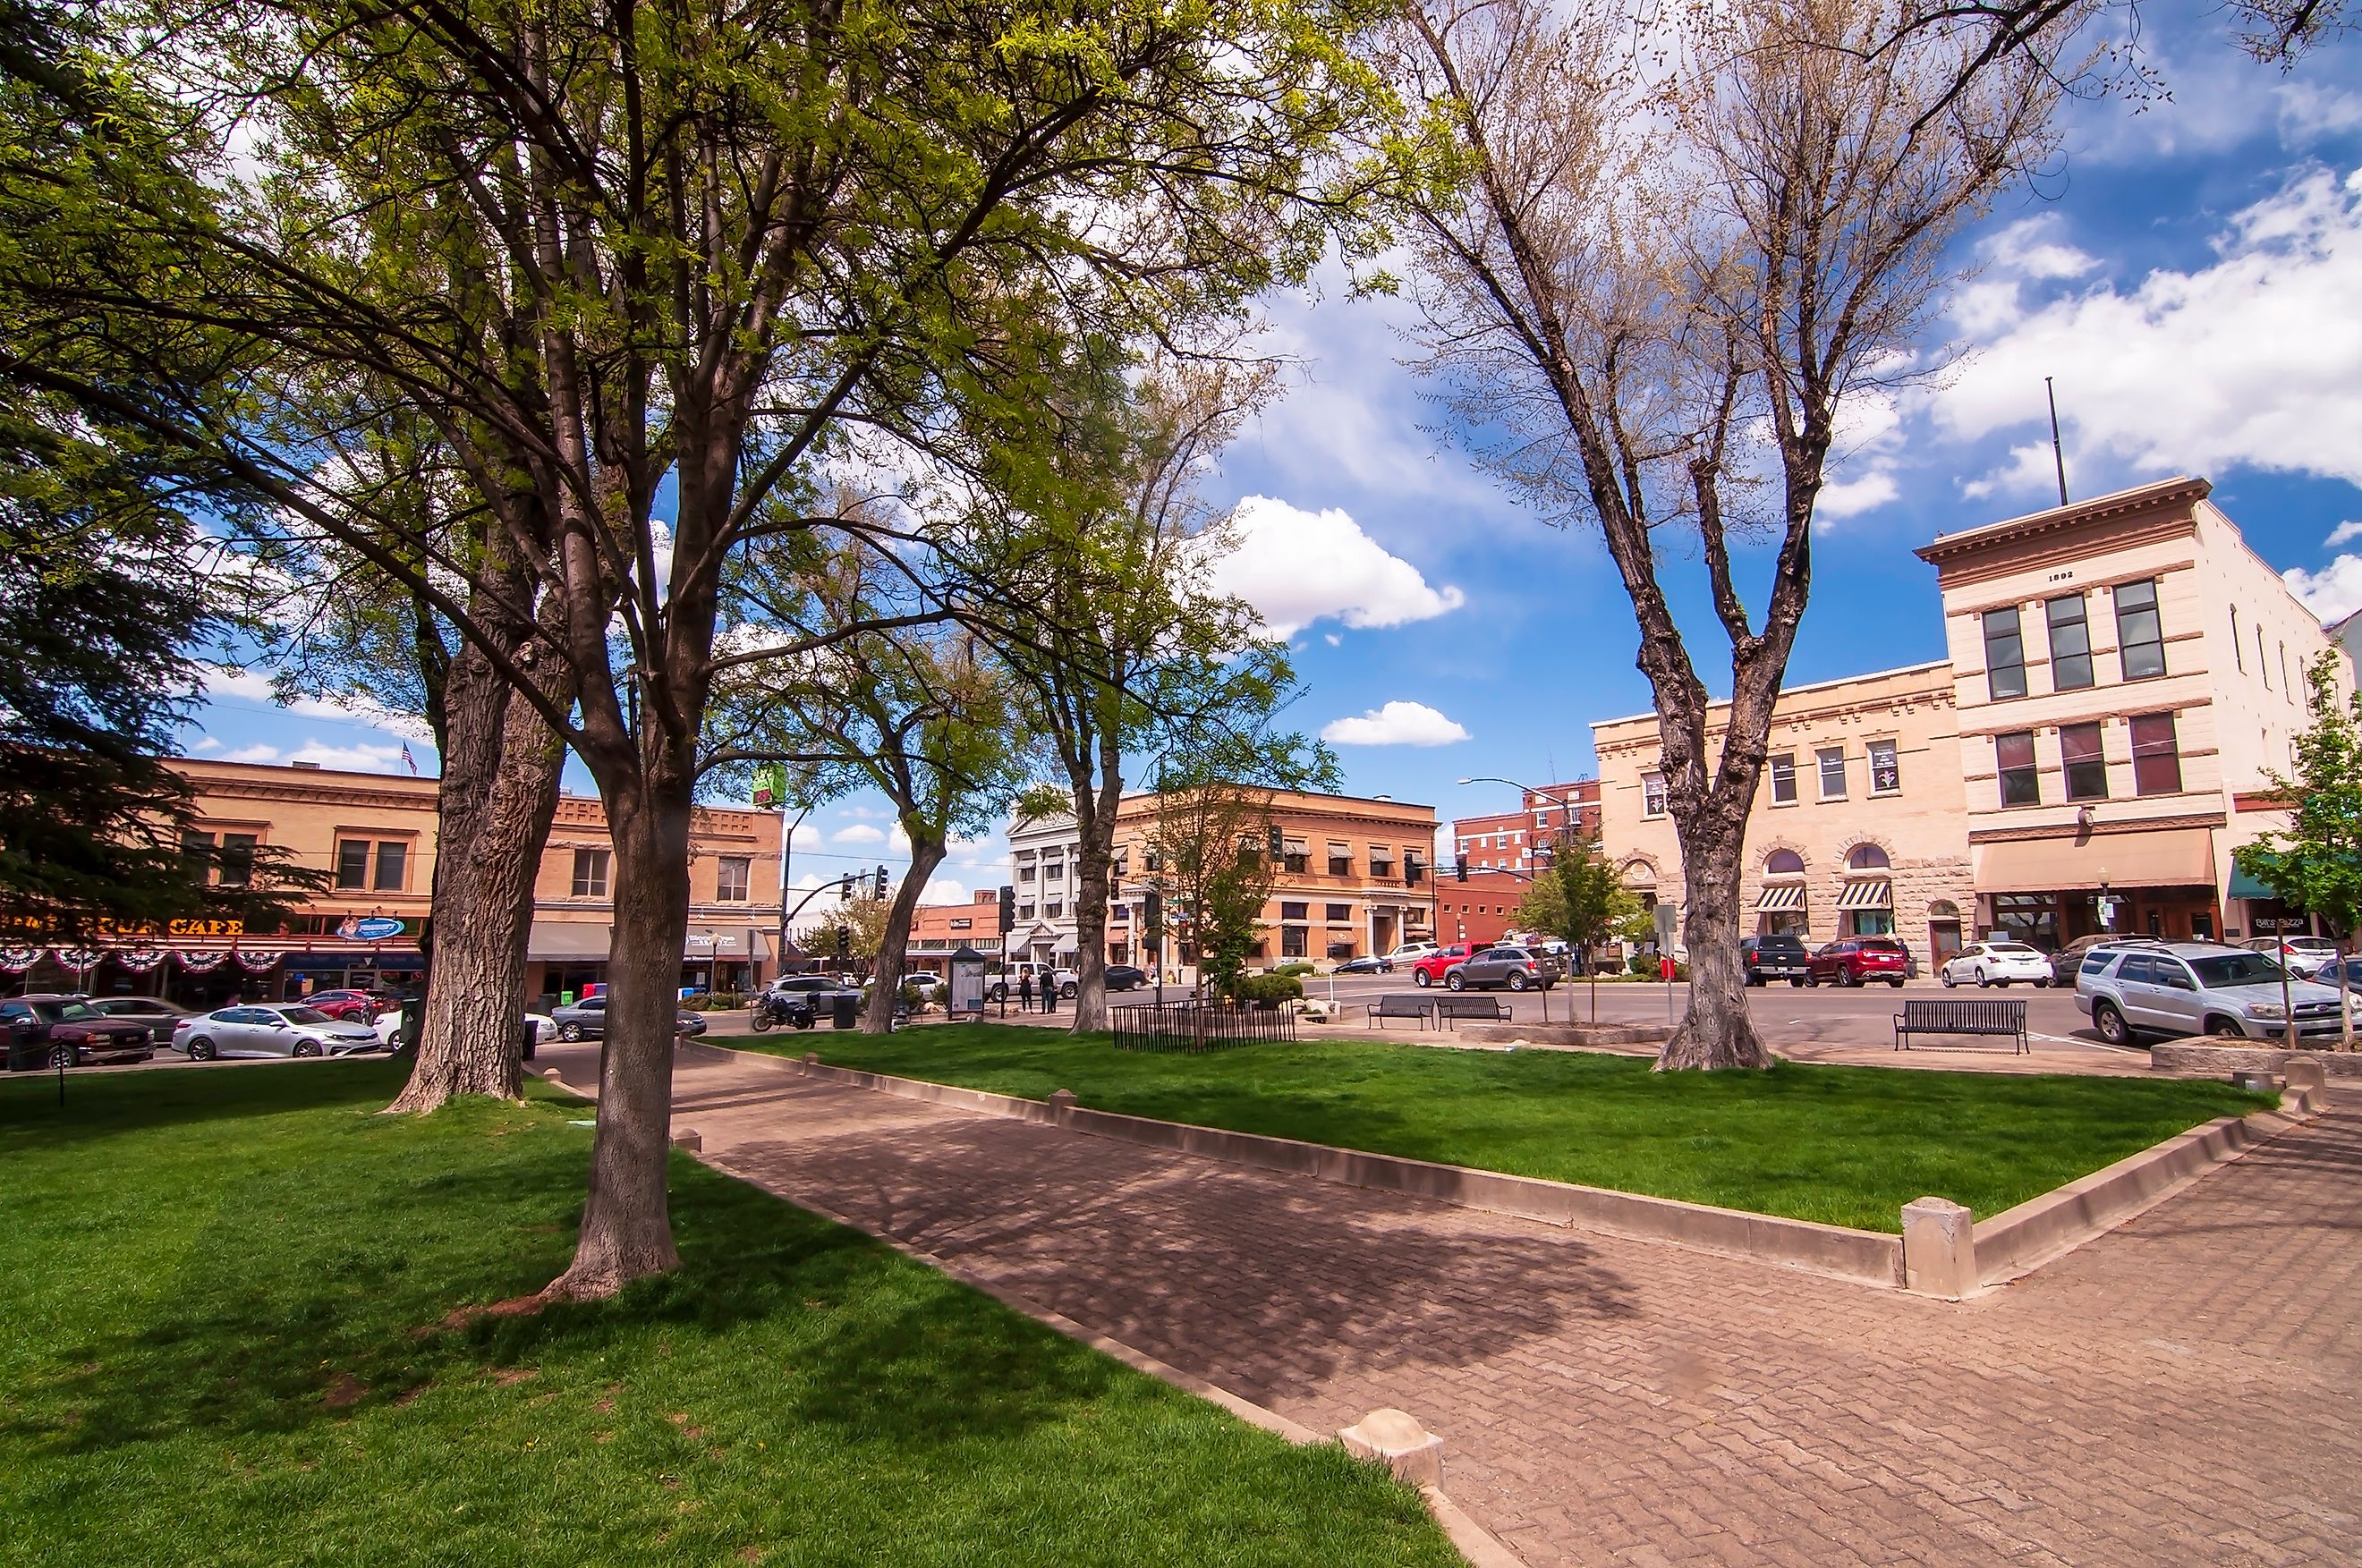 The Yavapai County Courthouse Square filled with businesses in Prescott, Arizona. Editorial credit: woodsnorthphoto / Shutterstock.com